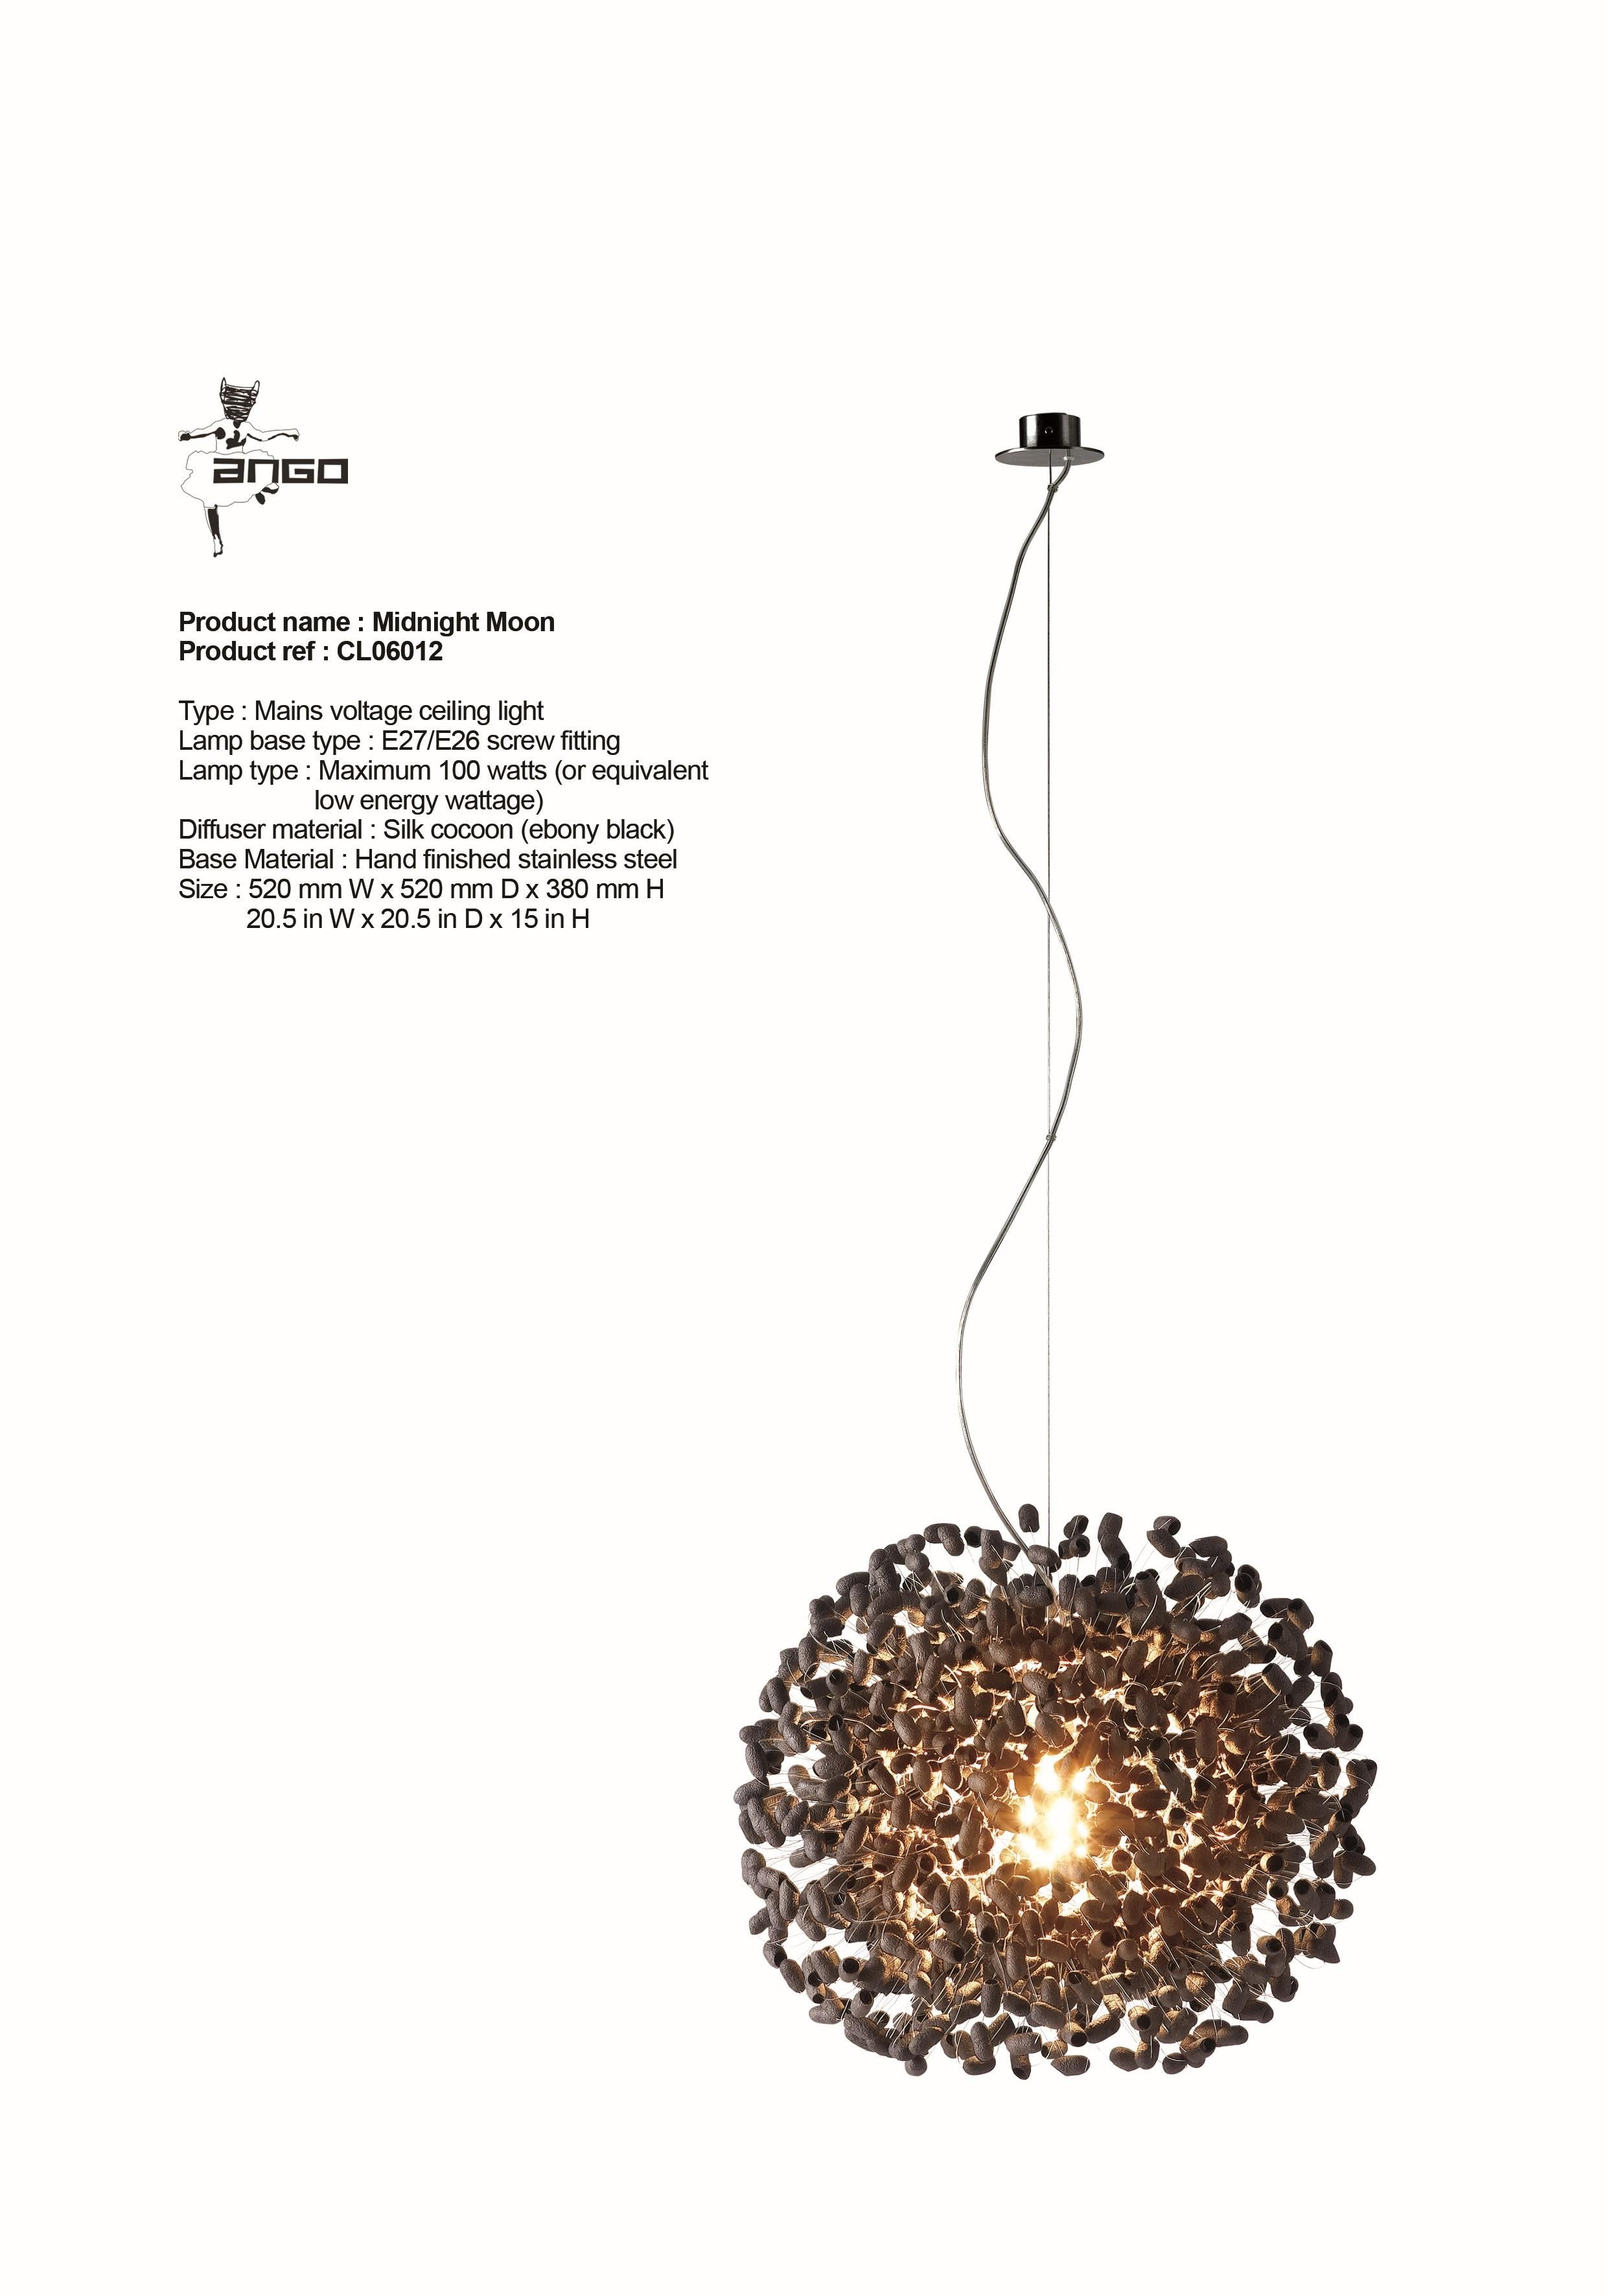 New in Box
Ango Midnight Moon Ceiling Light
Specs included on tear sheet in listing.
2 available (separate listings)
Ready to ship.